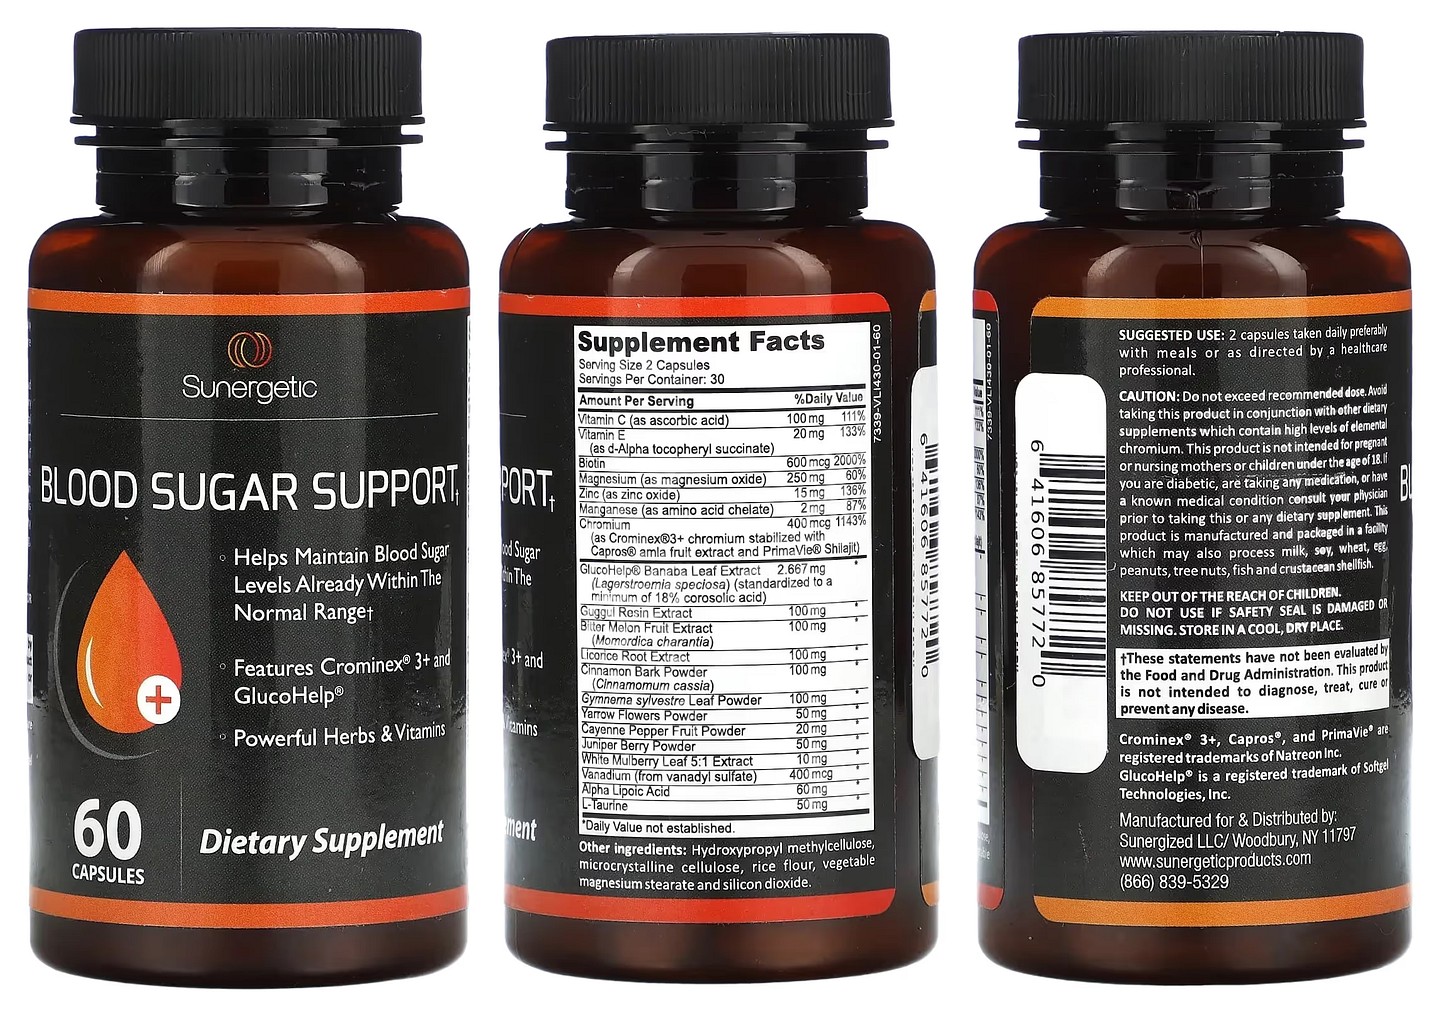 Sunergetic, Blood Sugar Support packaging